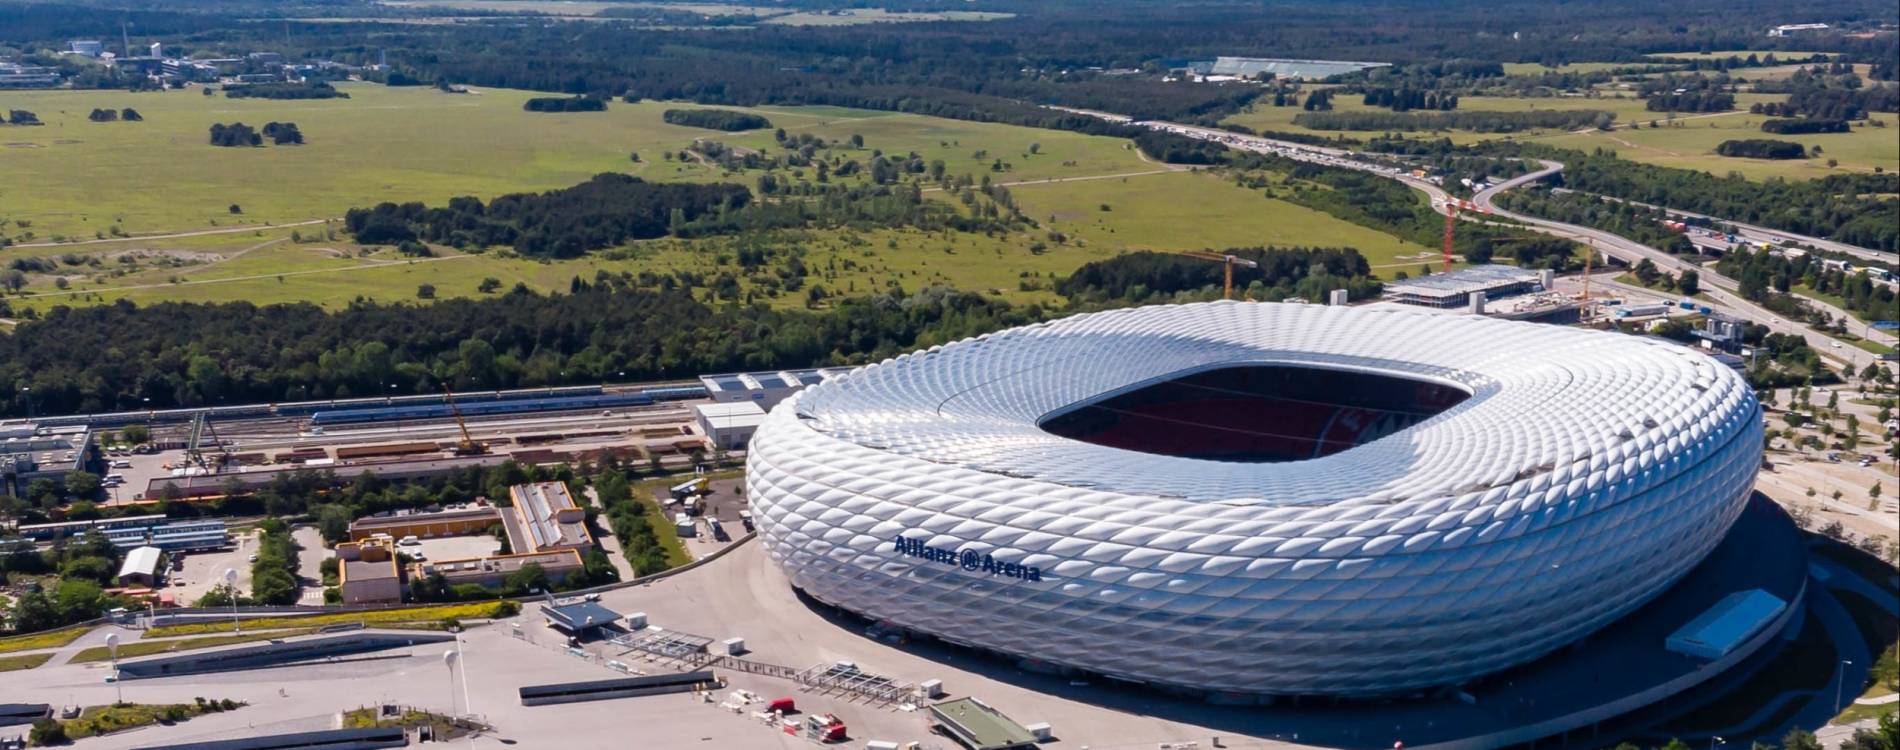 Allianz Arena is the home of FC Bayern Munich